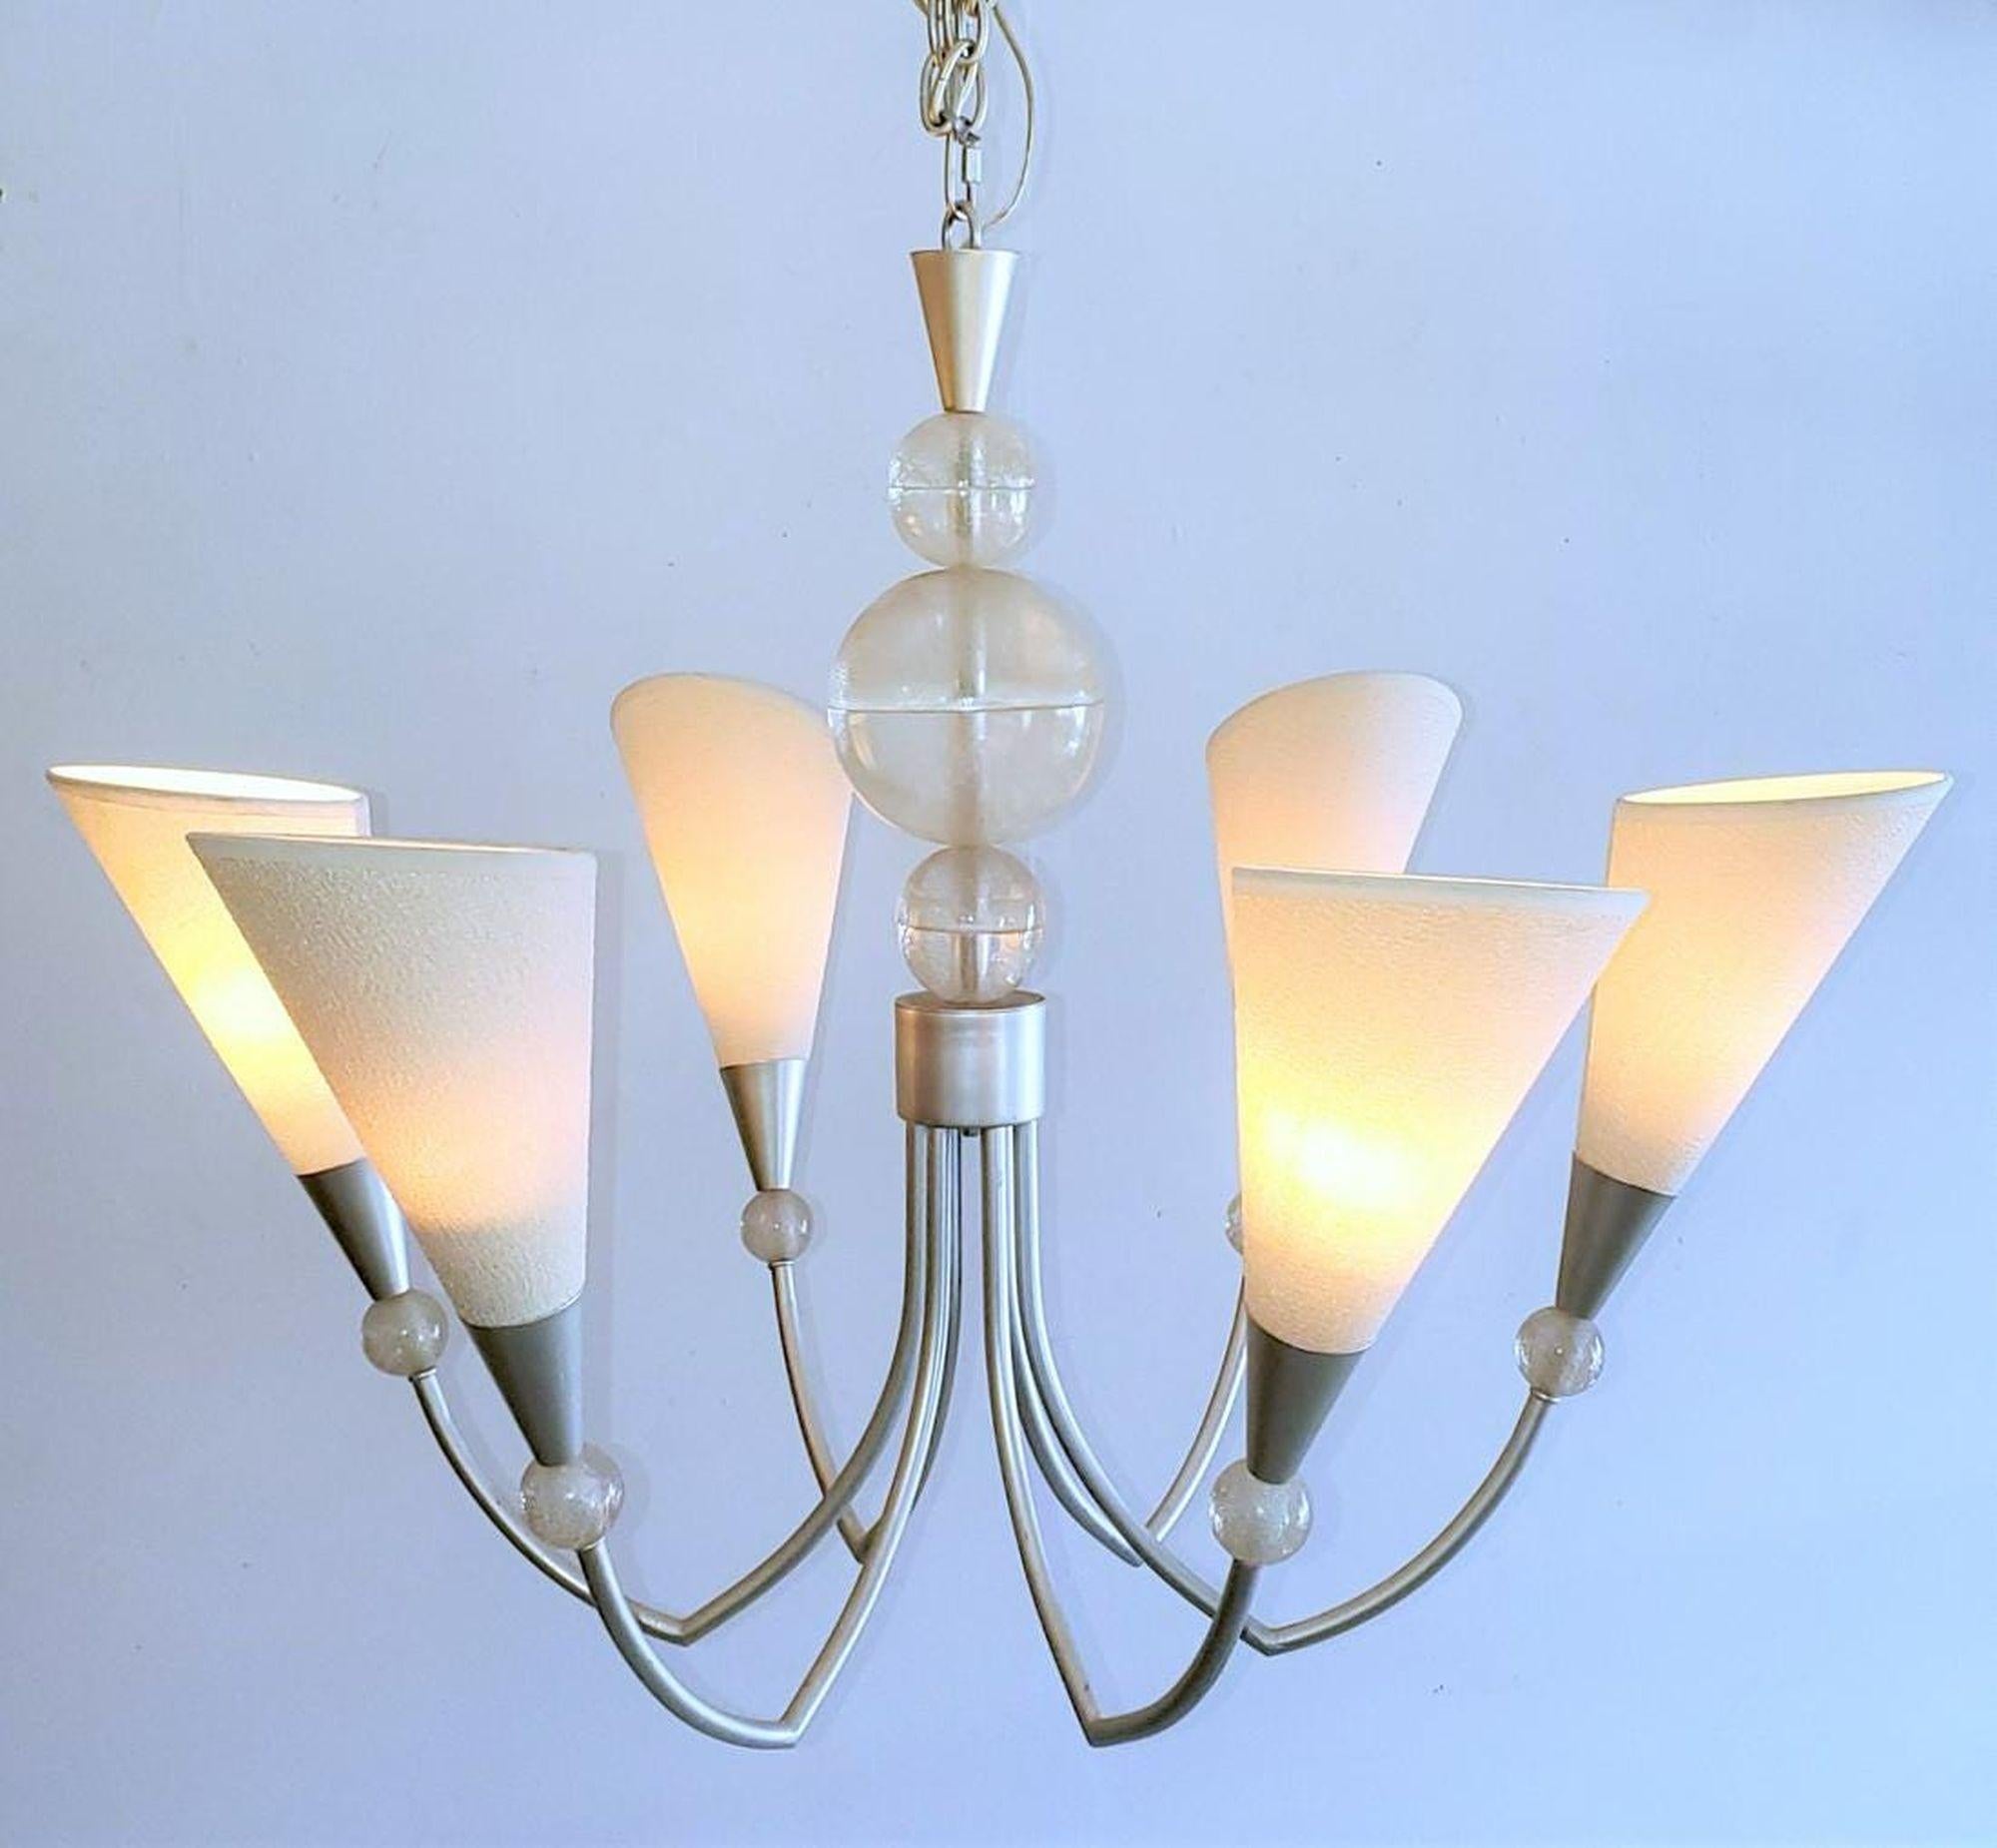 80s French Lucite Six Arm Chandelier with three Lucite center balls on the spine of the chandelier.
Six arms extending outward like flower petals with Lucite balls at the base of the shades opening the petal for illumination.

Beautiful chrome,